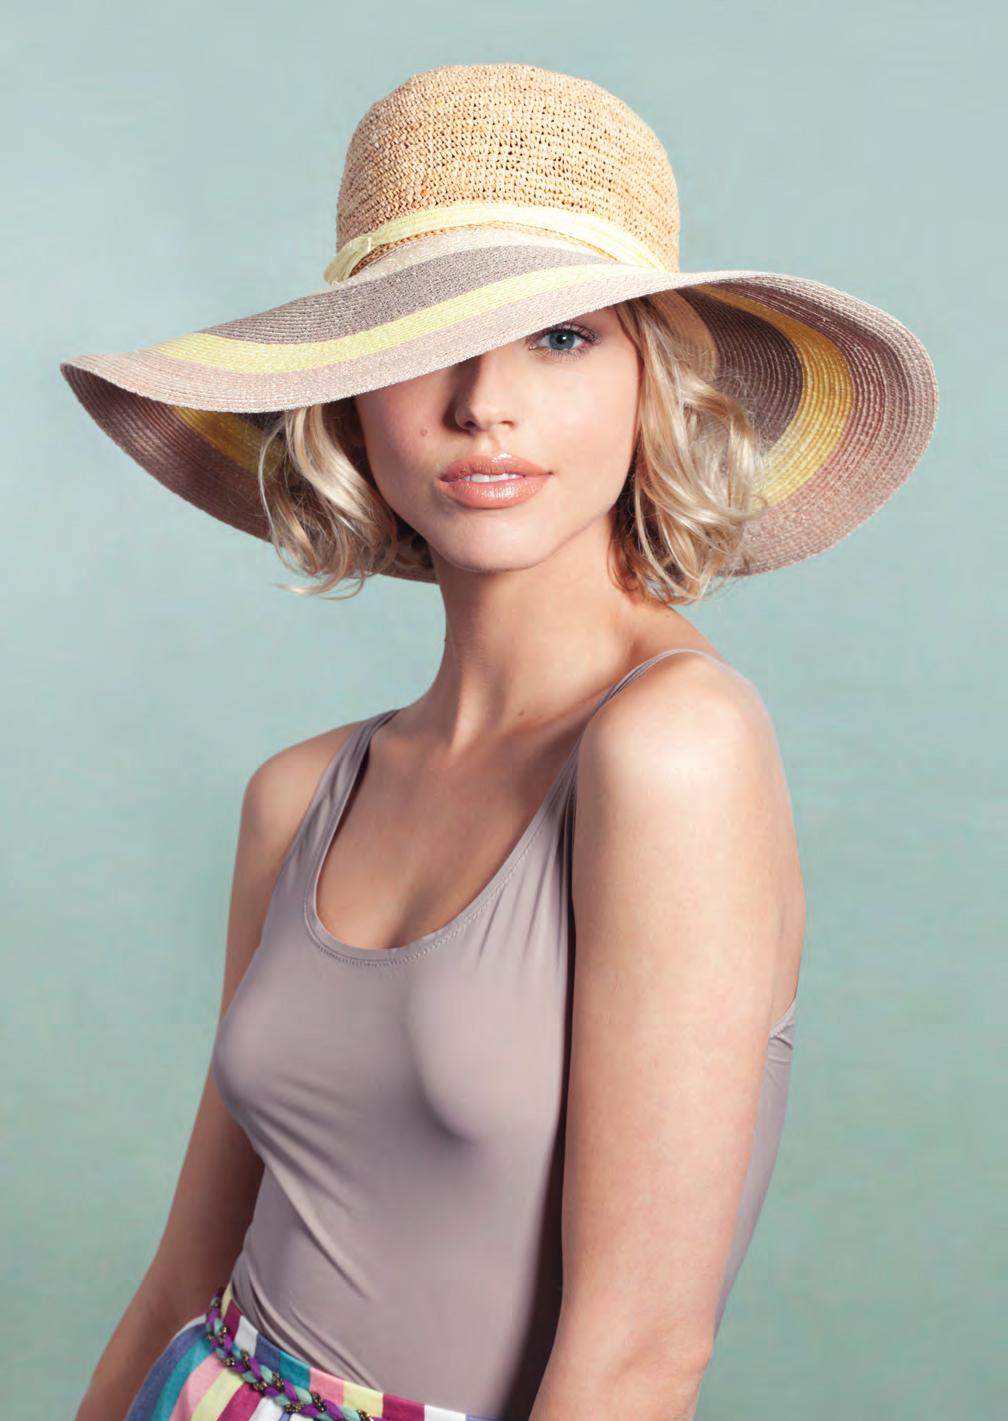 Summer Breeze Casual elegance combined with a playful approach to shapes and design are characteristic features of Nicki Marquardt s 2013 Summer Collection.